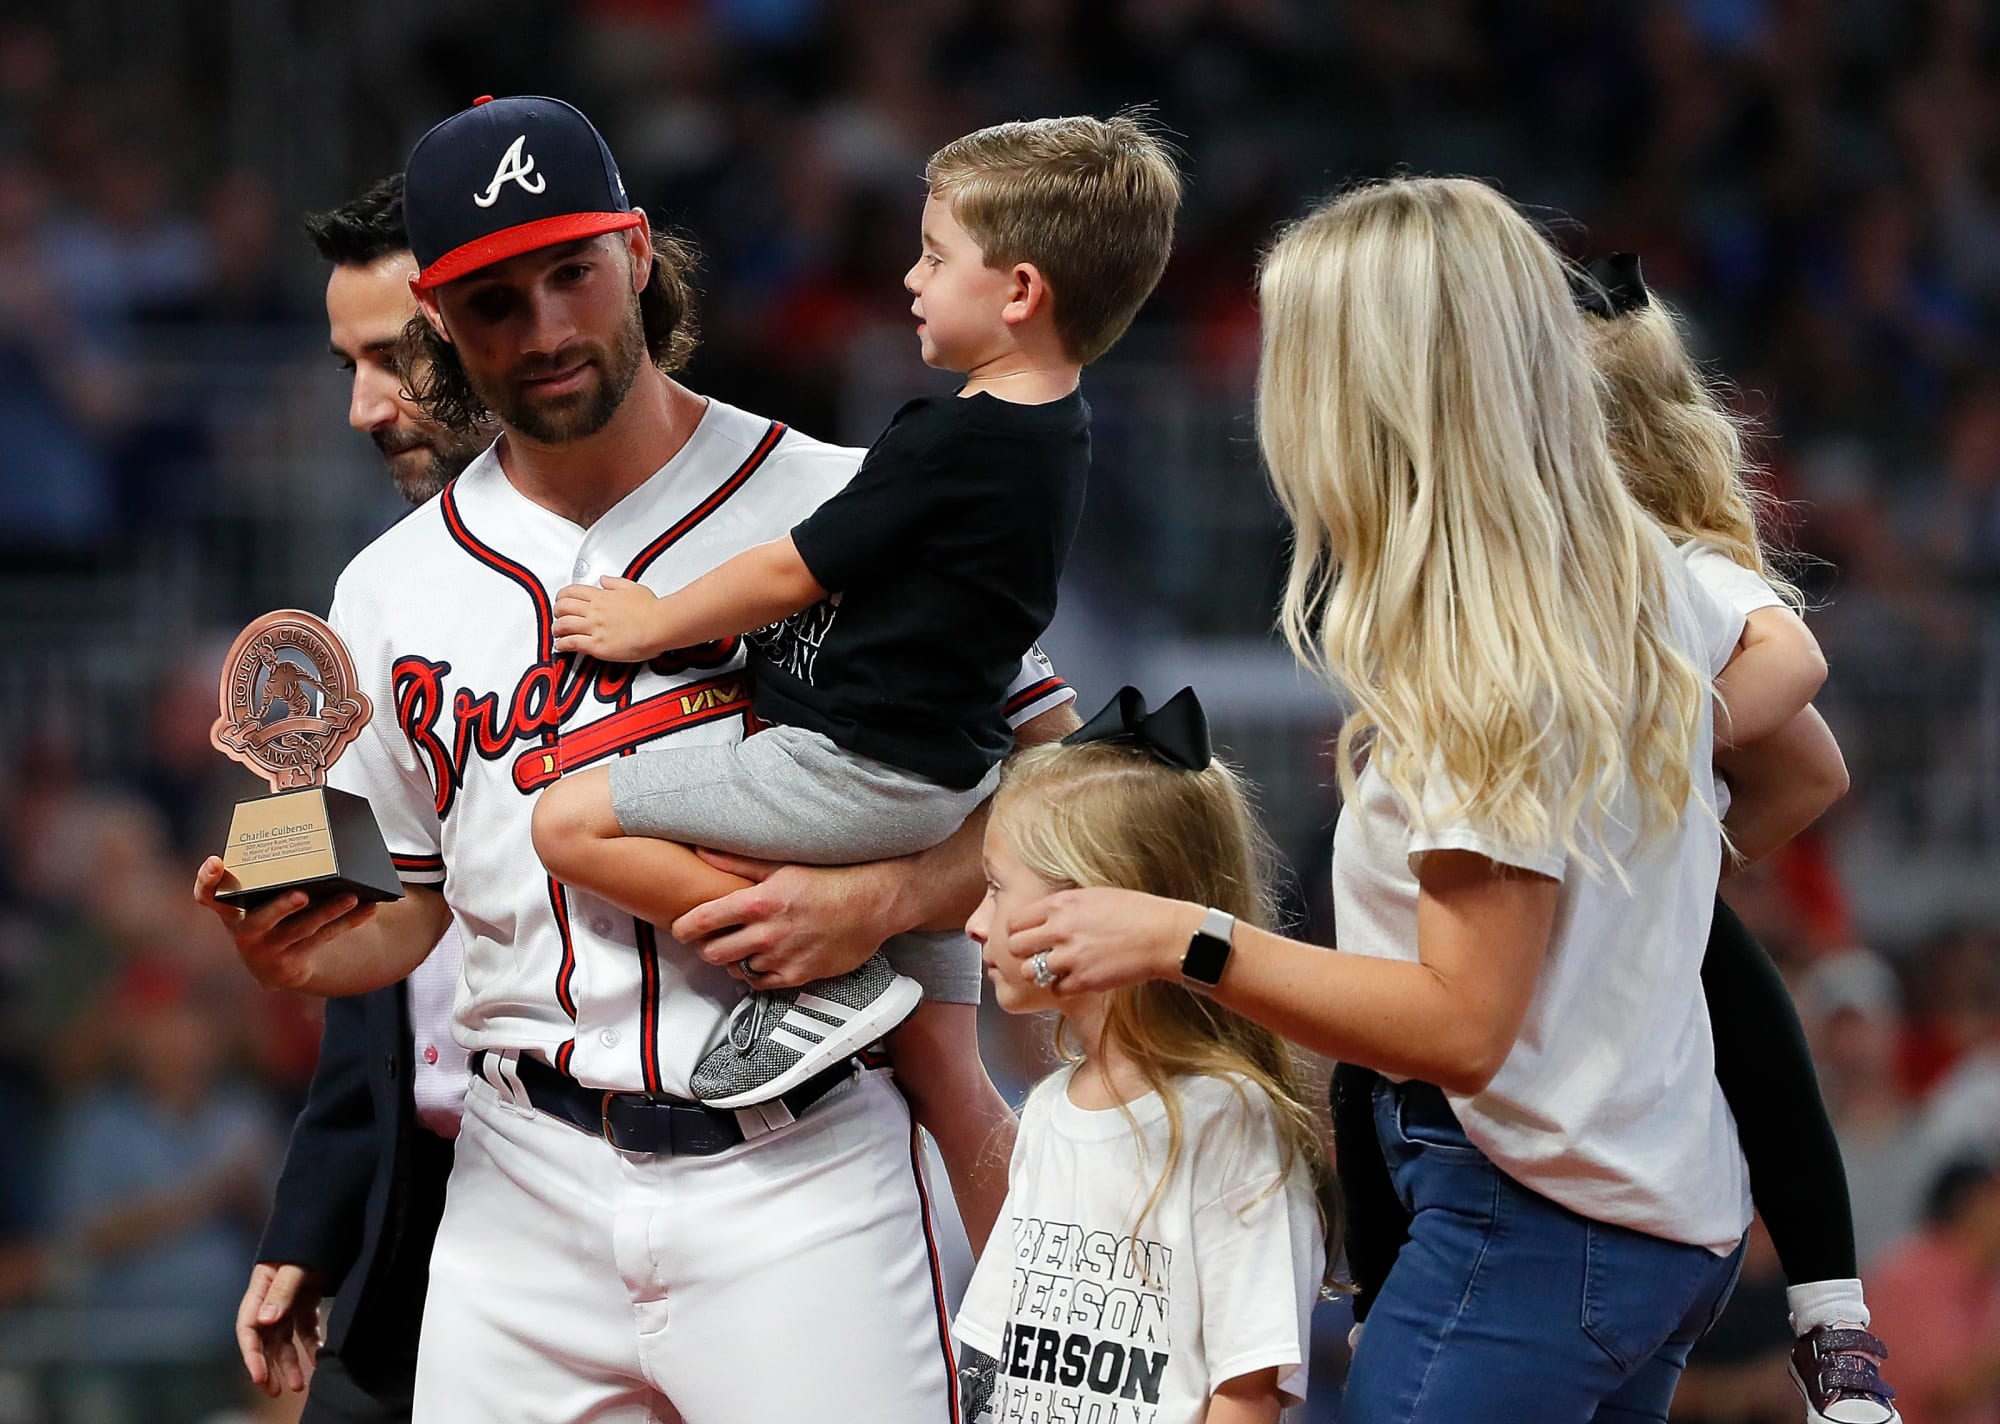 Charlie Culberson - 2019 FULL Highlights 